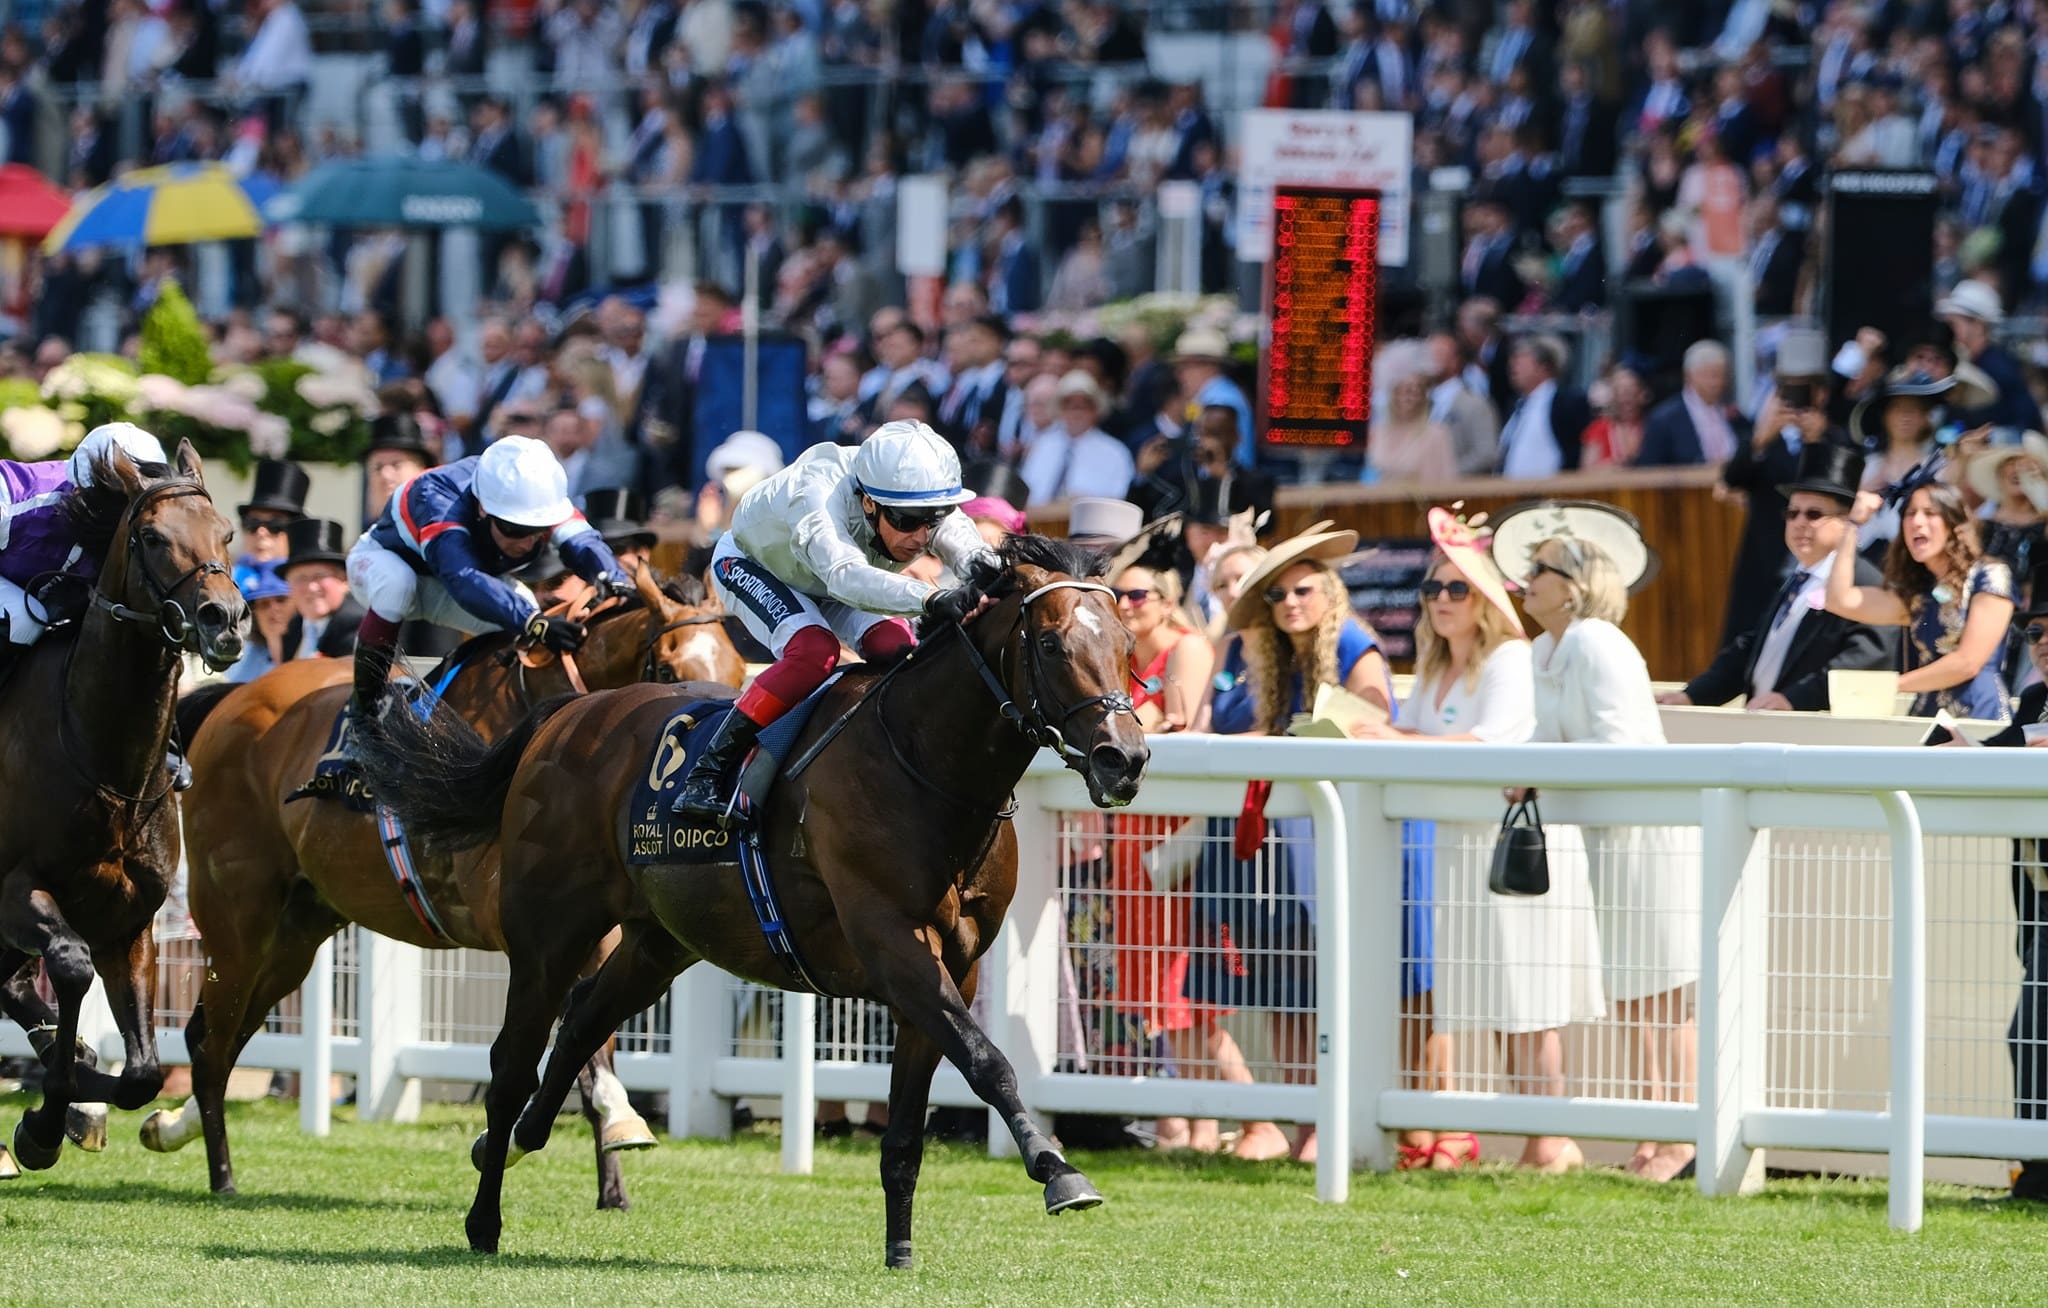 Exciting Opening Day of Royal Ascot With a Number of Impressive Winners